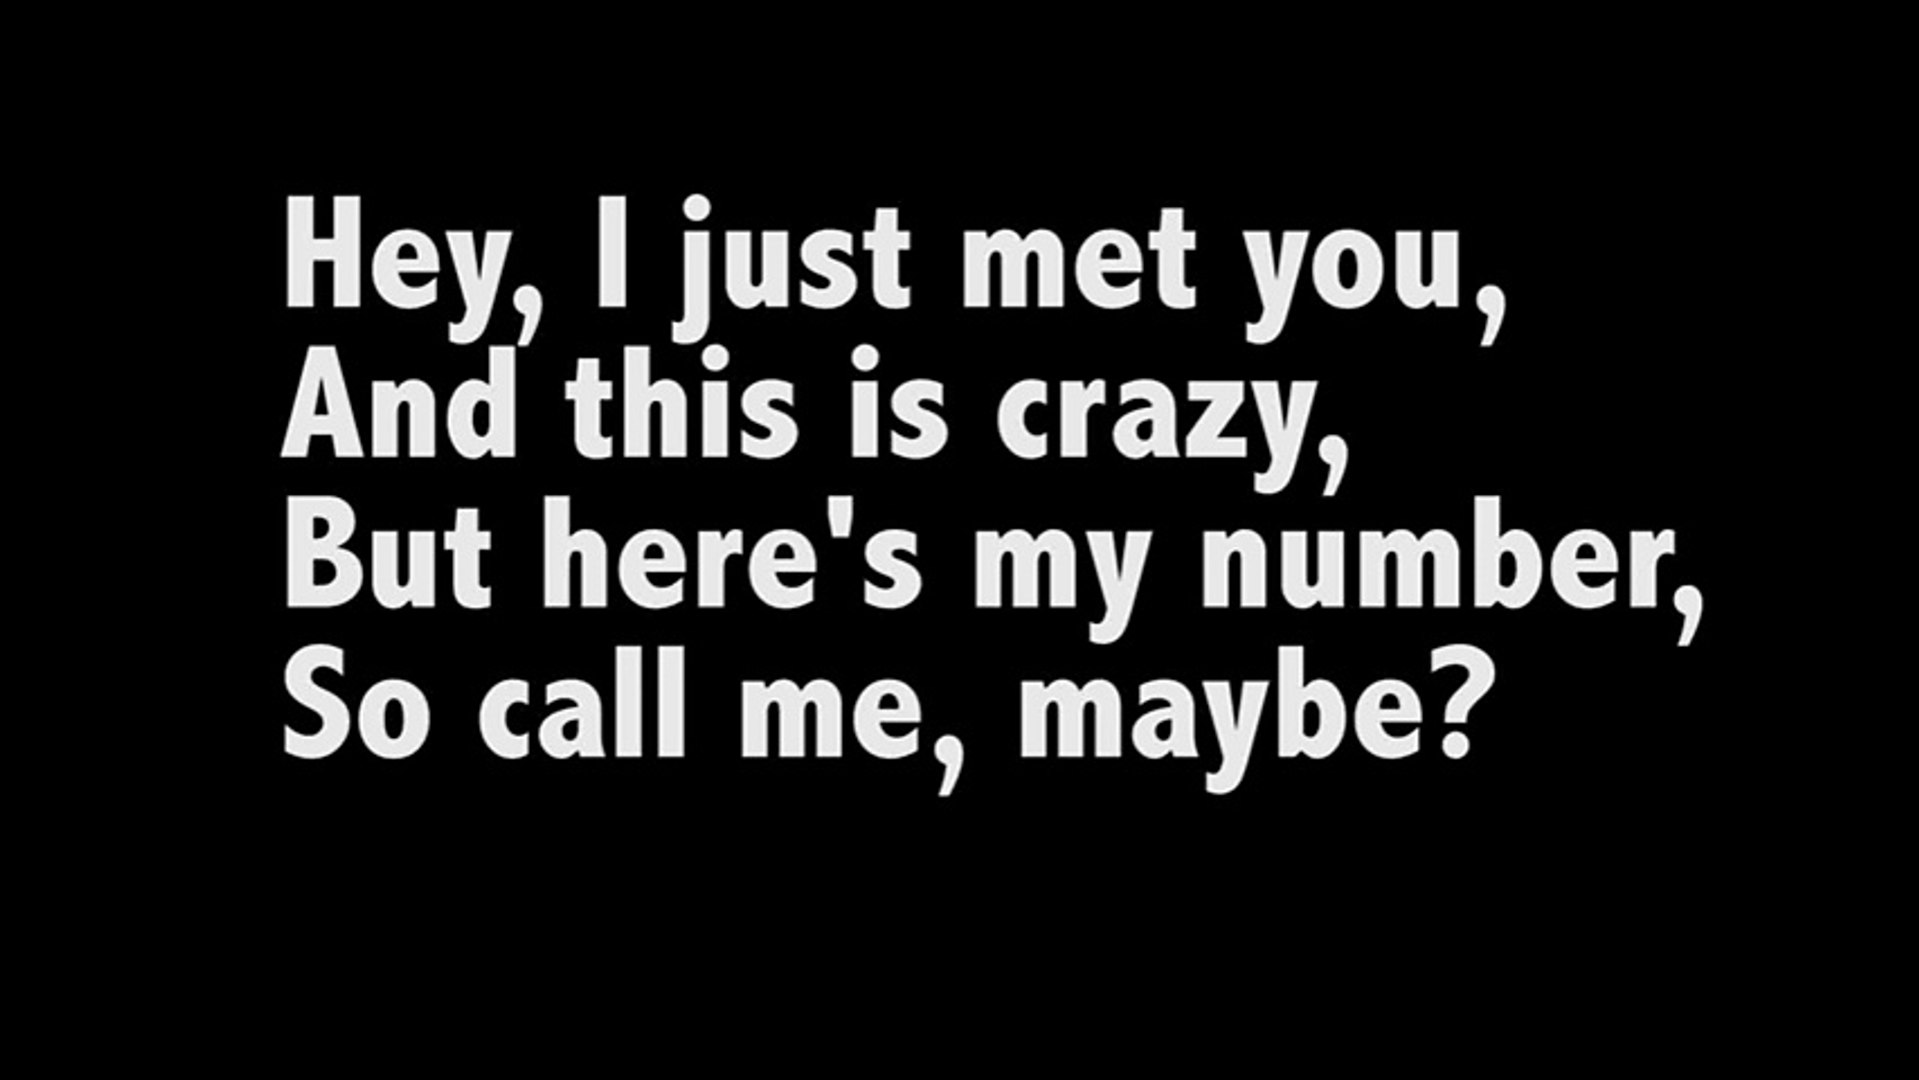 Call me maybe- British accent and lyrics - Holywood Songs - Songs HD